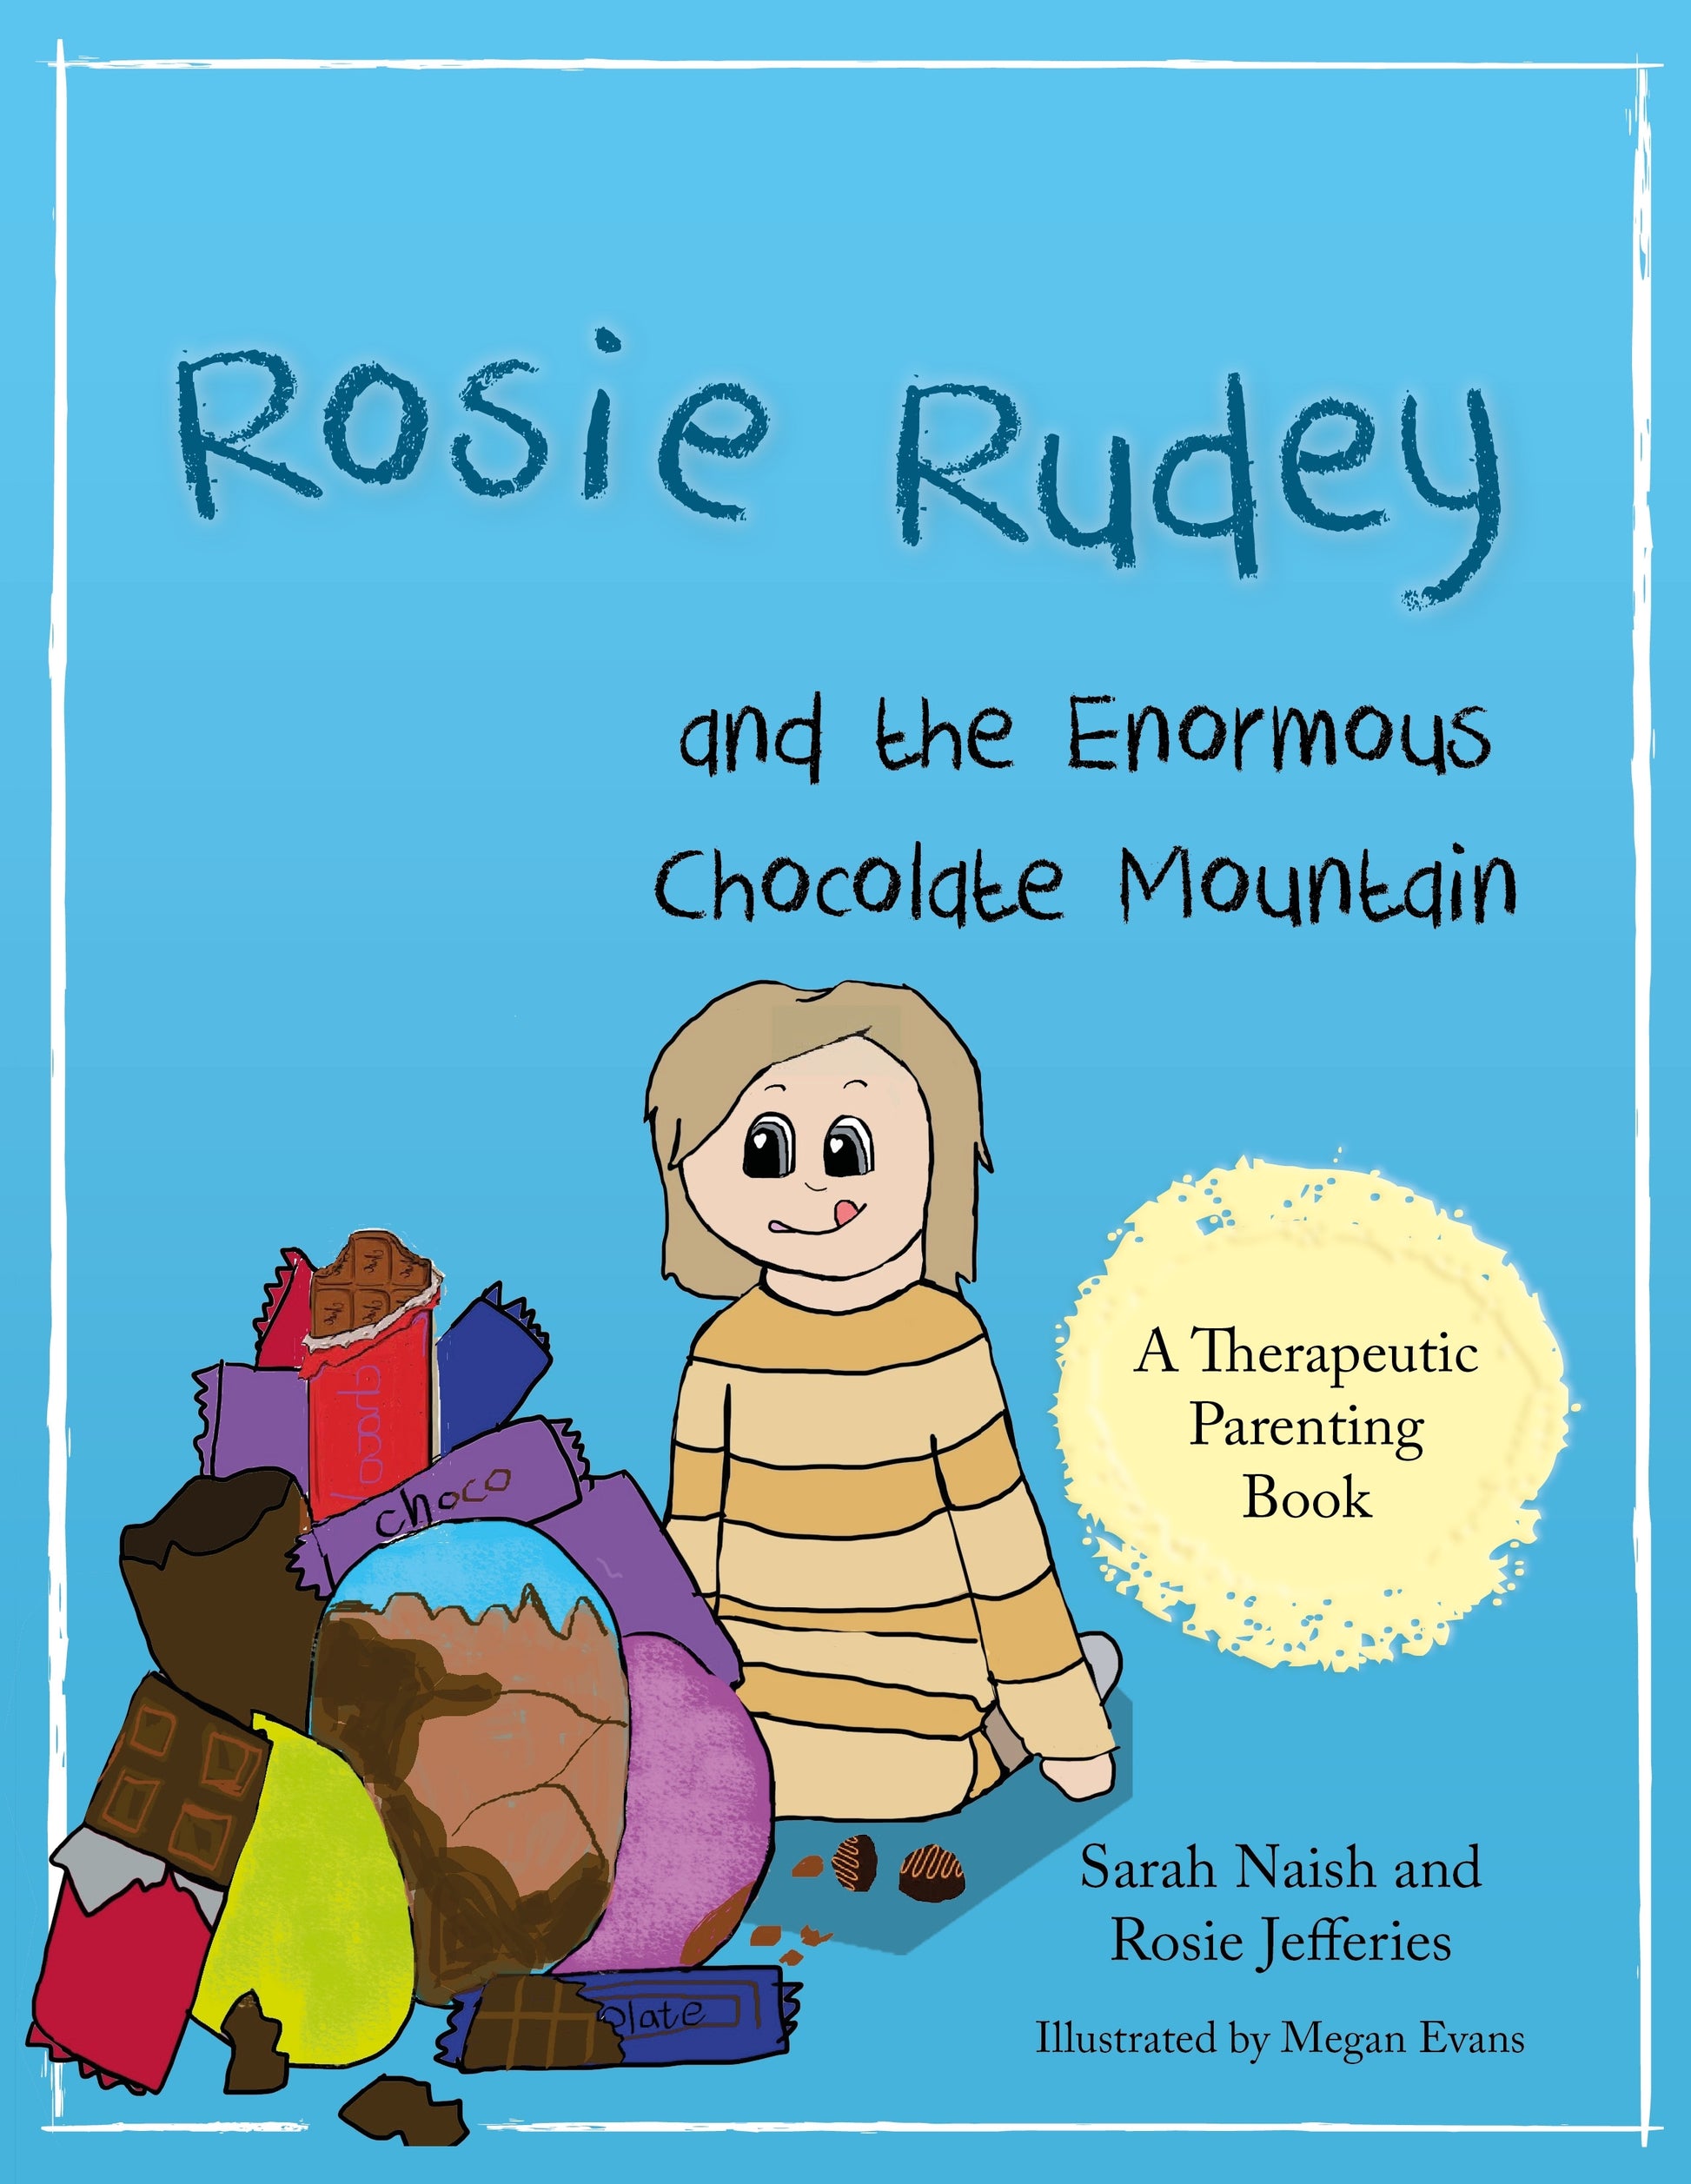 Rosie Rudey and the Enormous Chocolate Mountain by Megan Evans, Rosie Jefferies, Sarah Naish